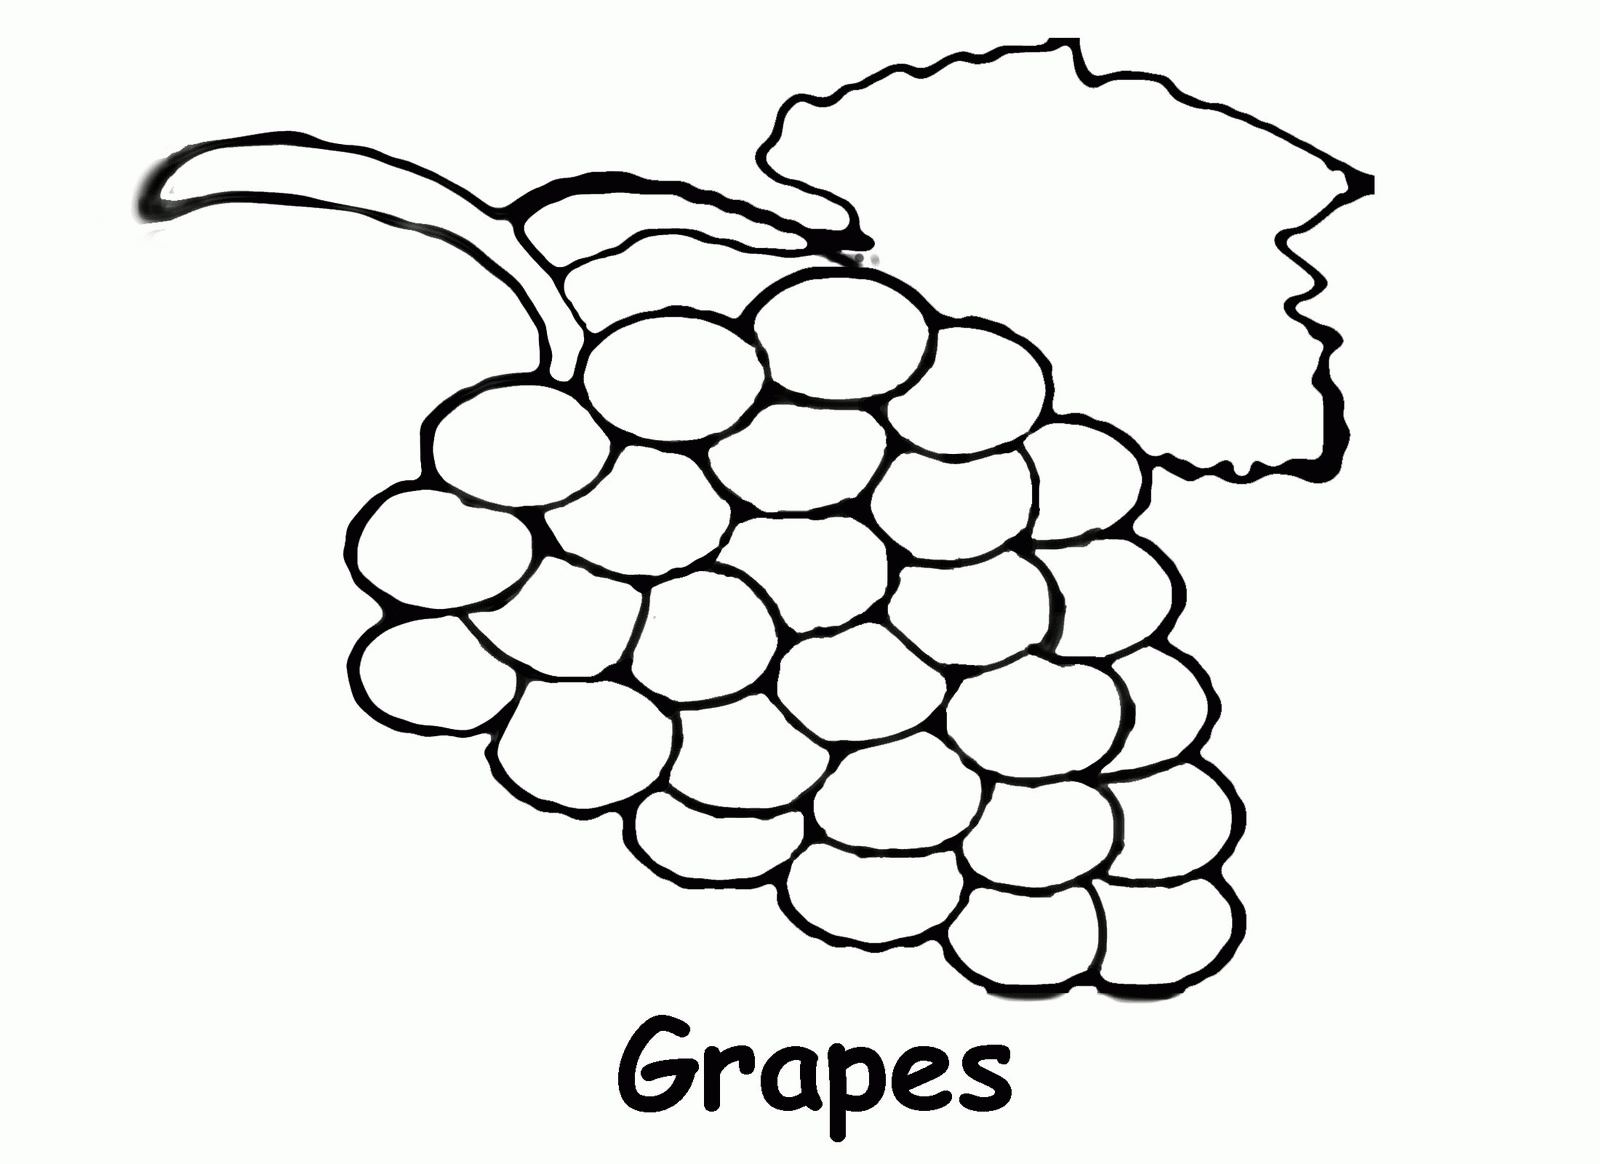 colouring pictures of grapes planting grapes coloring pages color luna colouring pictures of grapes 